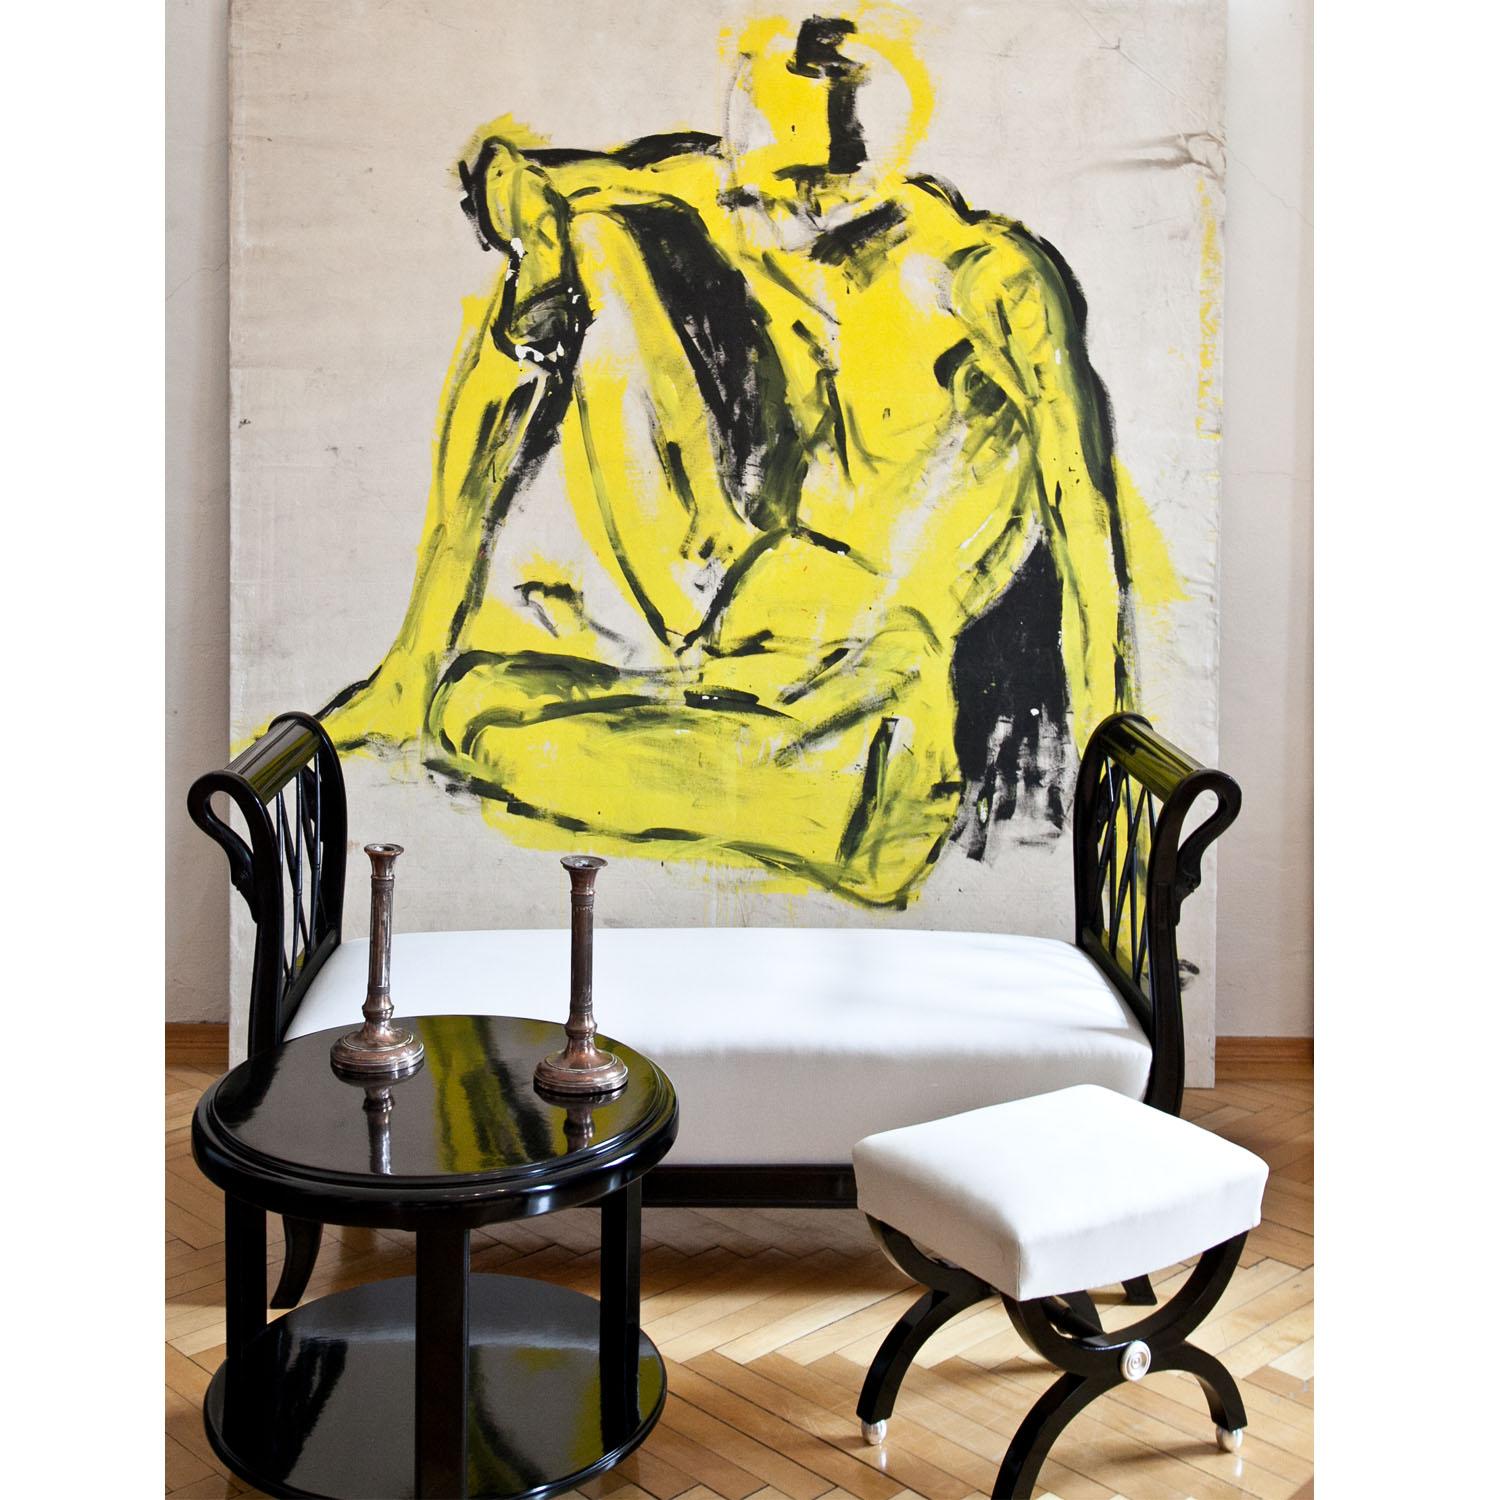 Large-format painting in black and yellow, depicting a sitting nude in an abstract sketch-like manner. The canvas was reversed and is painted on the back.